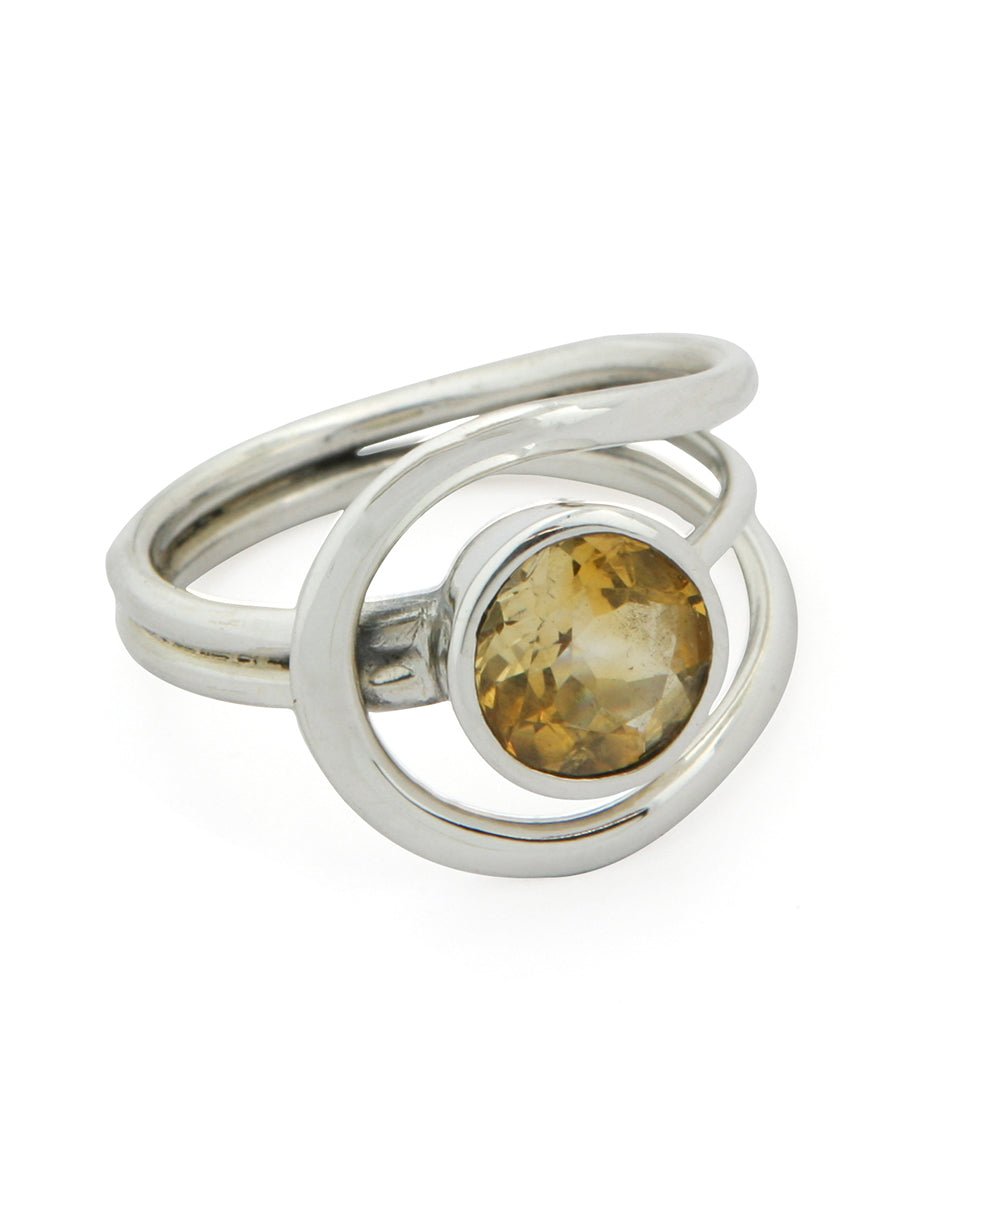 Sterling Silver Loop Ring with Citrine Gemstone - Rings Size 6